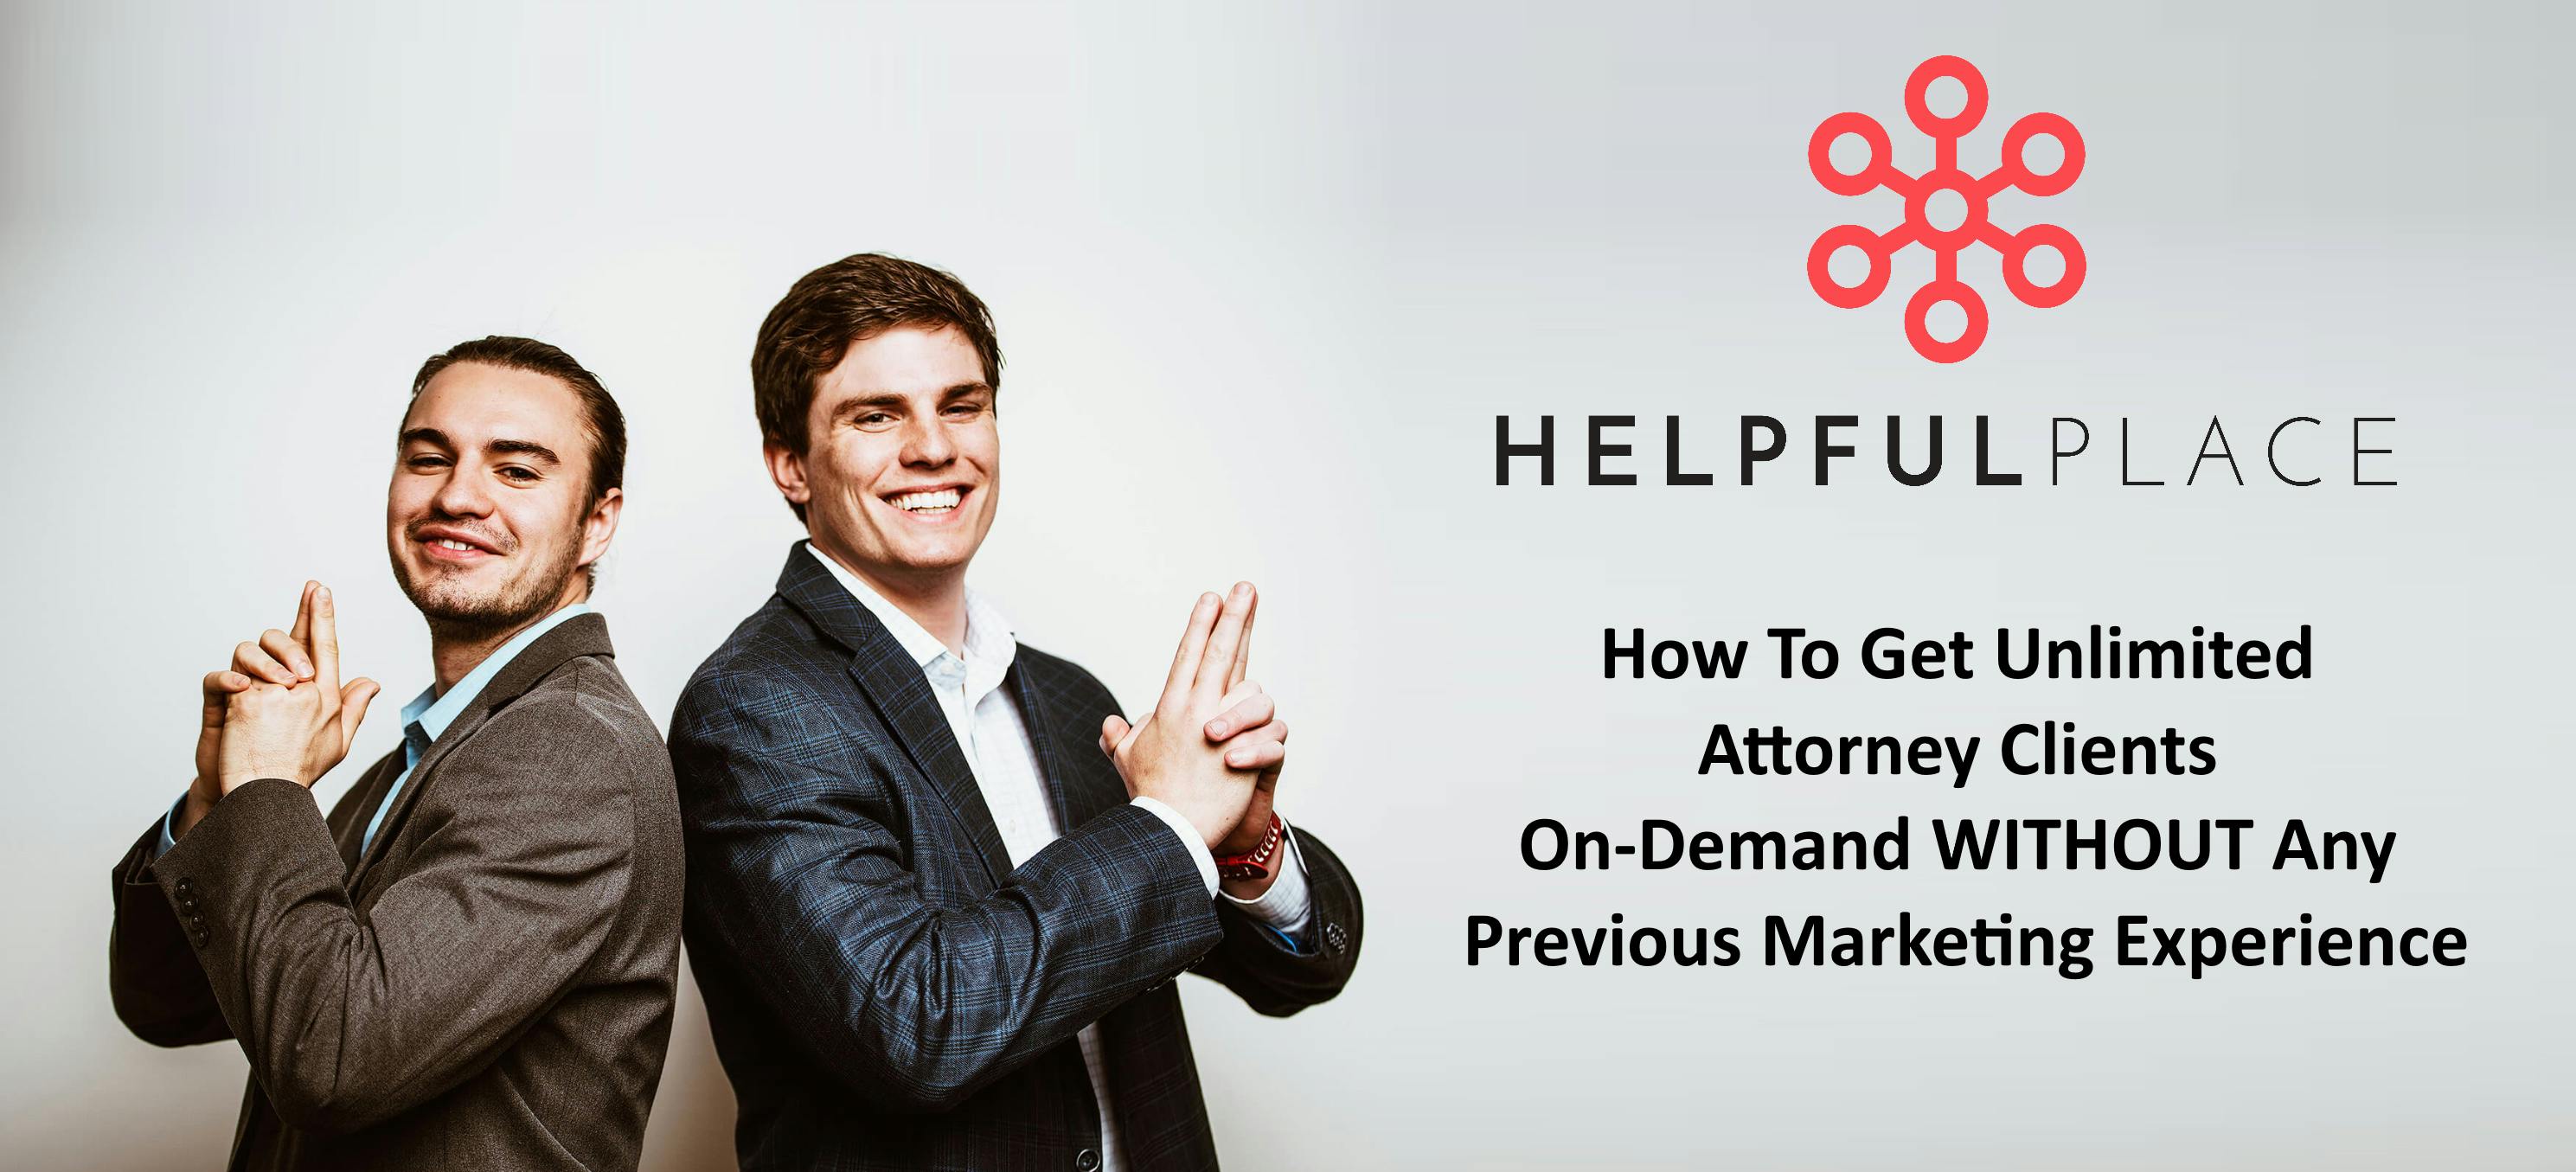 Free Training - How To Land Unlimited High Paying Attorney Clients On-Demand (Lead Generation) - Oakland, CA